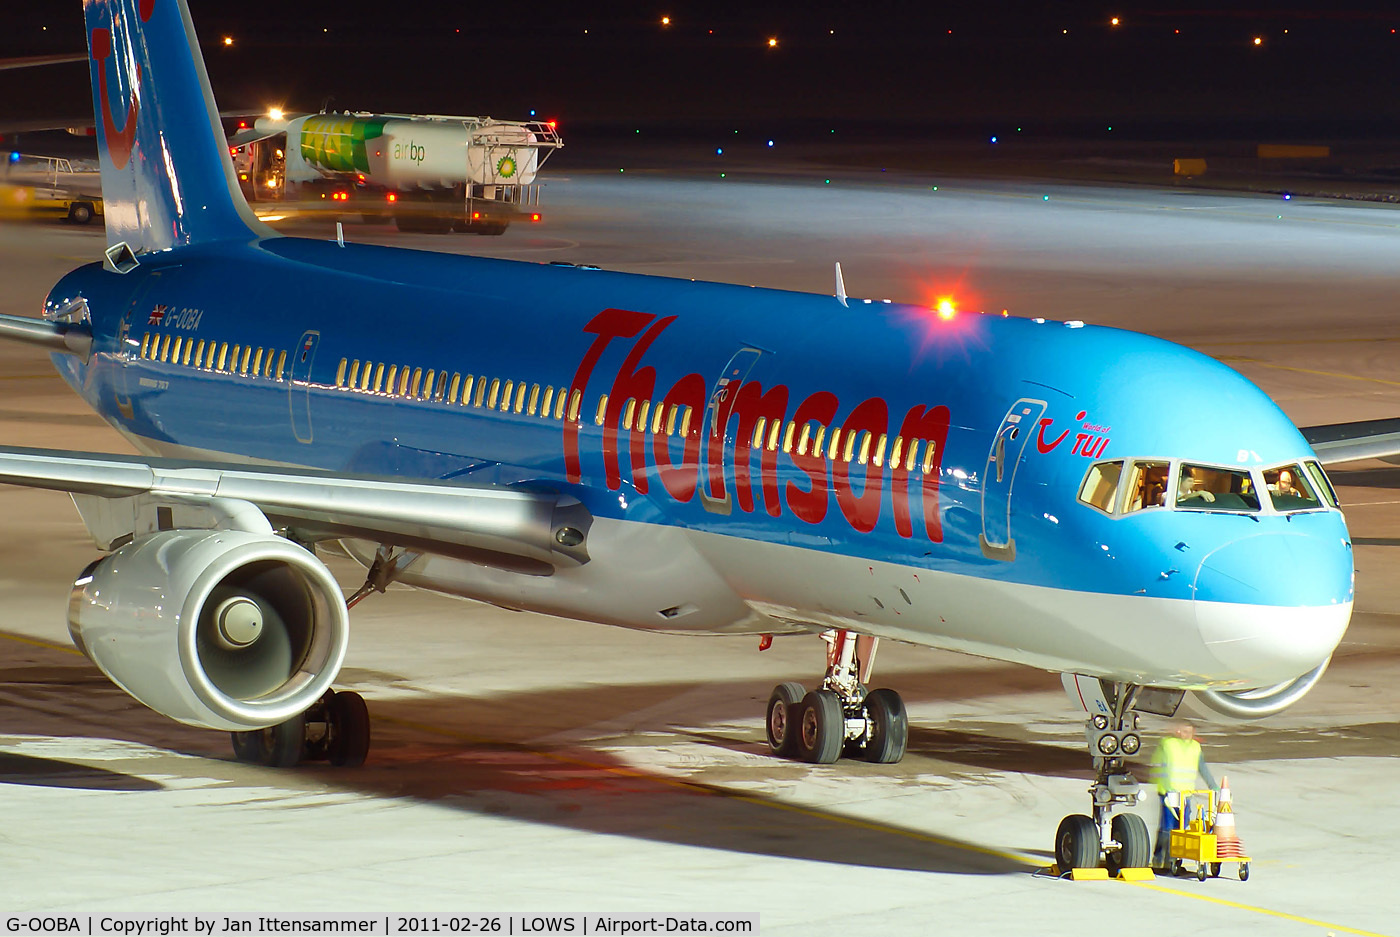 G-OOBA, 2000 Boeing 757-28A C/N 32446, Wintercharter @ LOWS